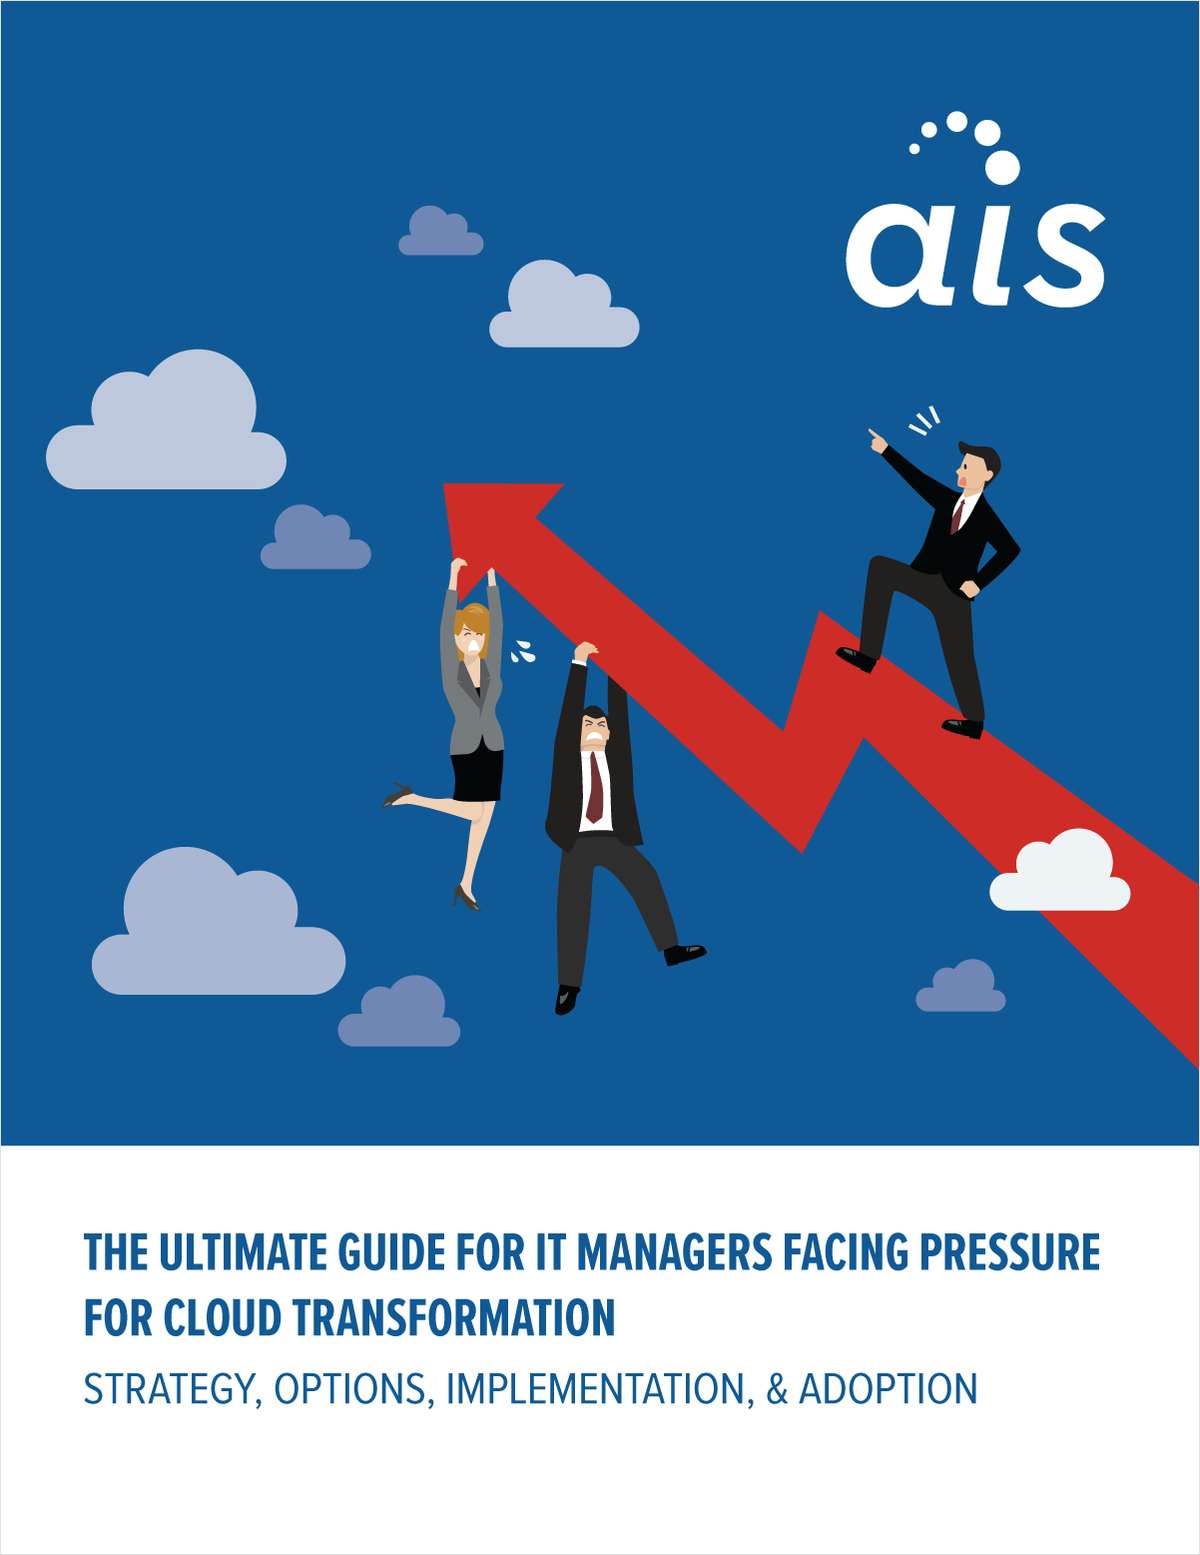 The Ultimate Guide for IT Managers Facing Pressure for Cloud Transformation